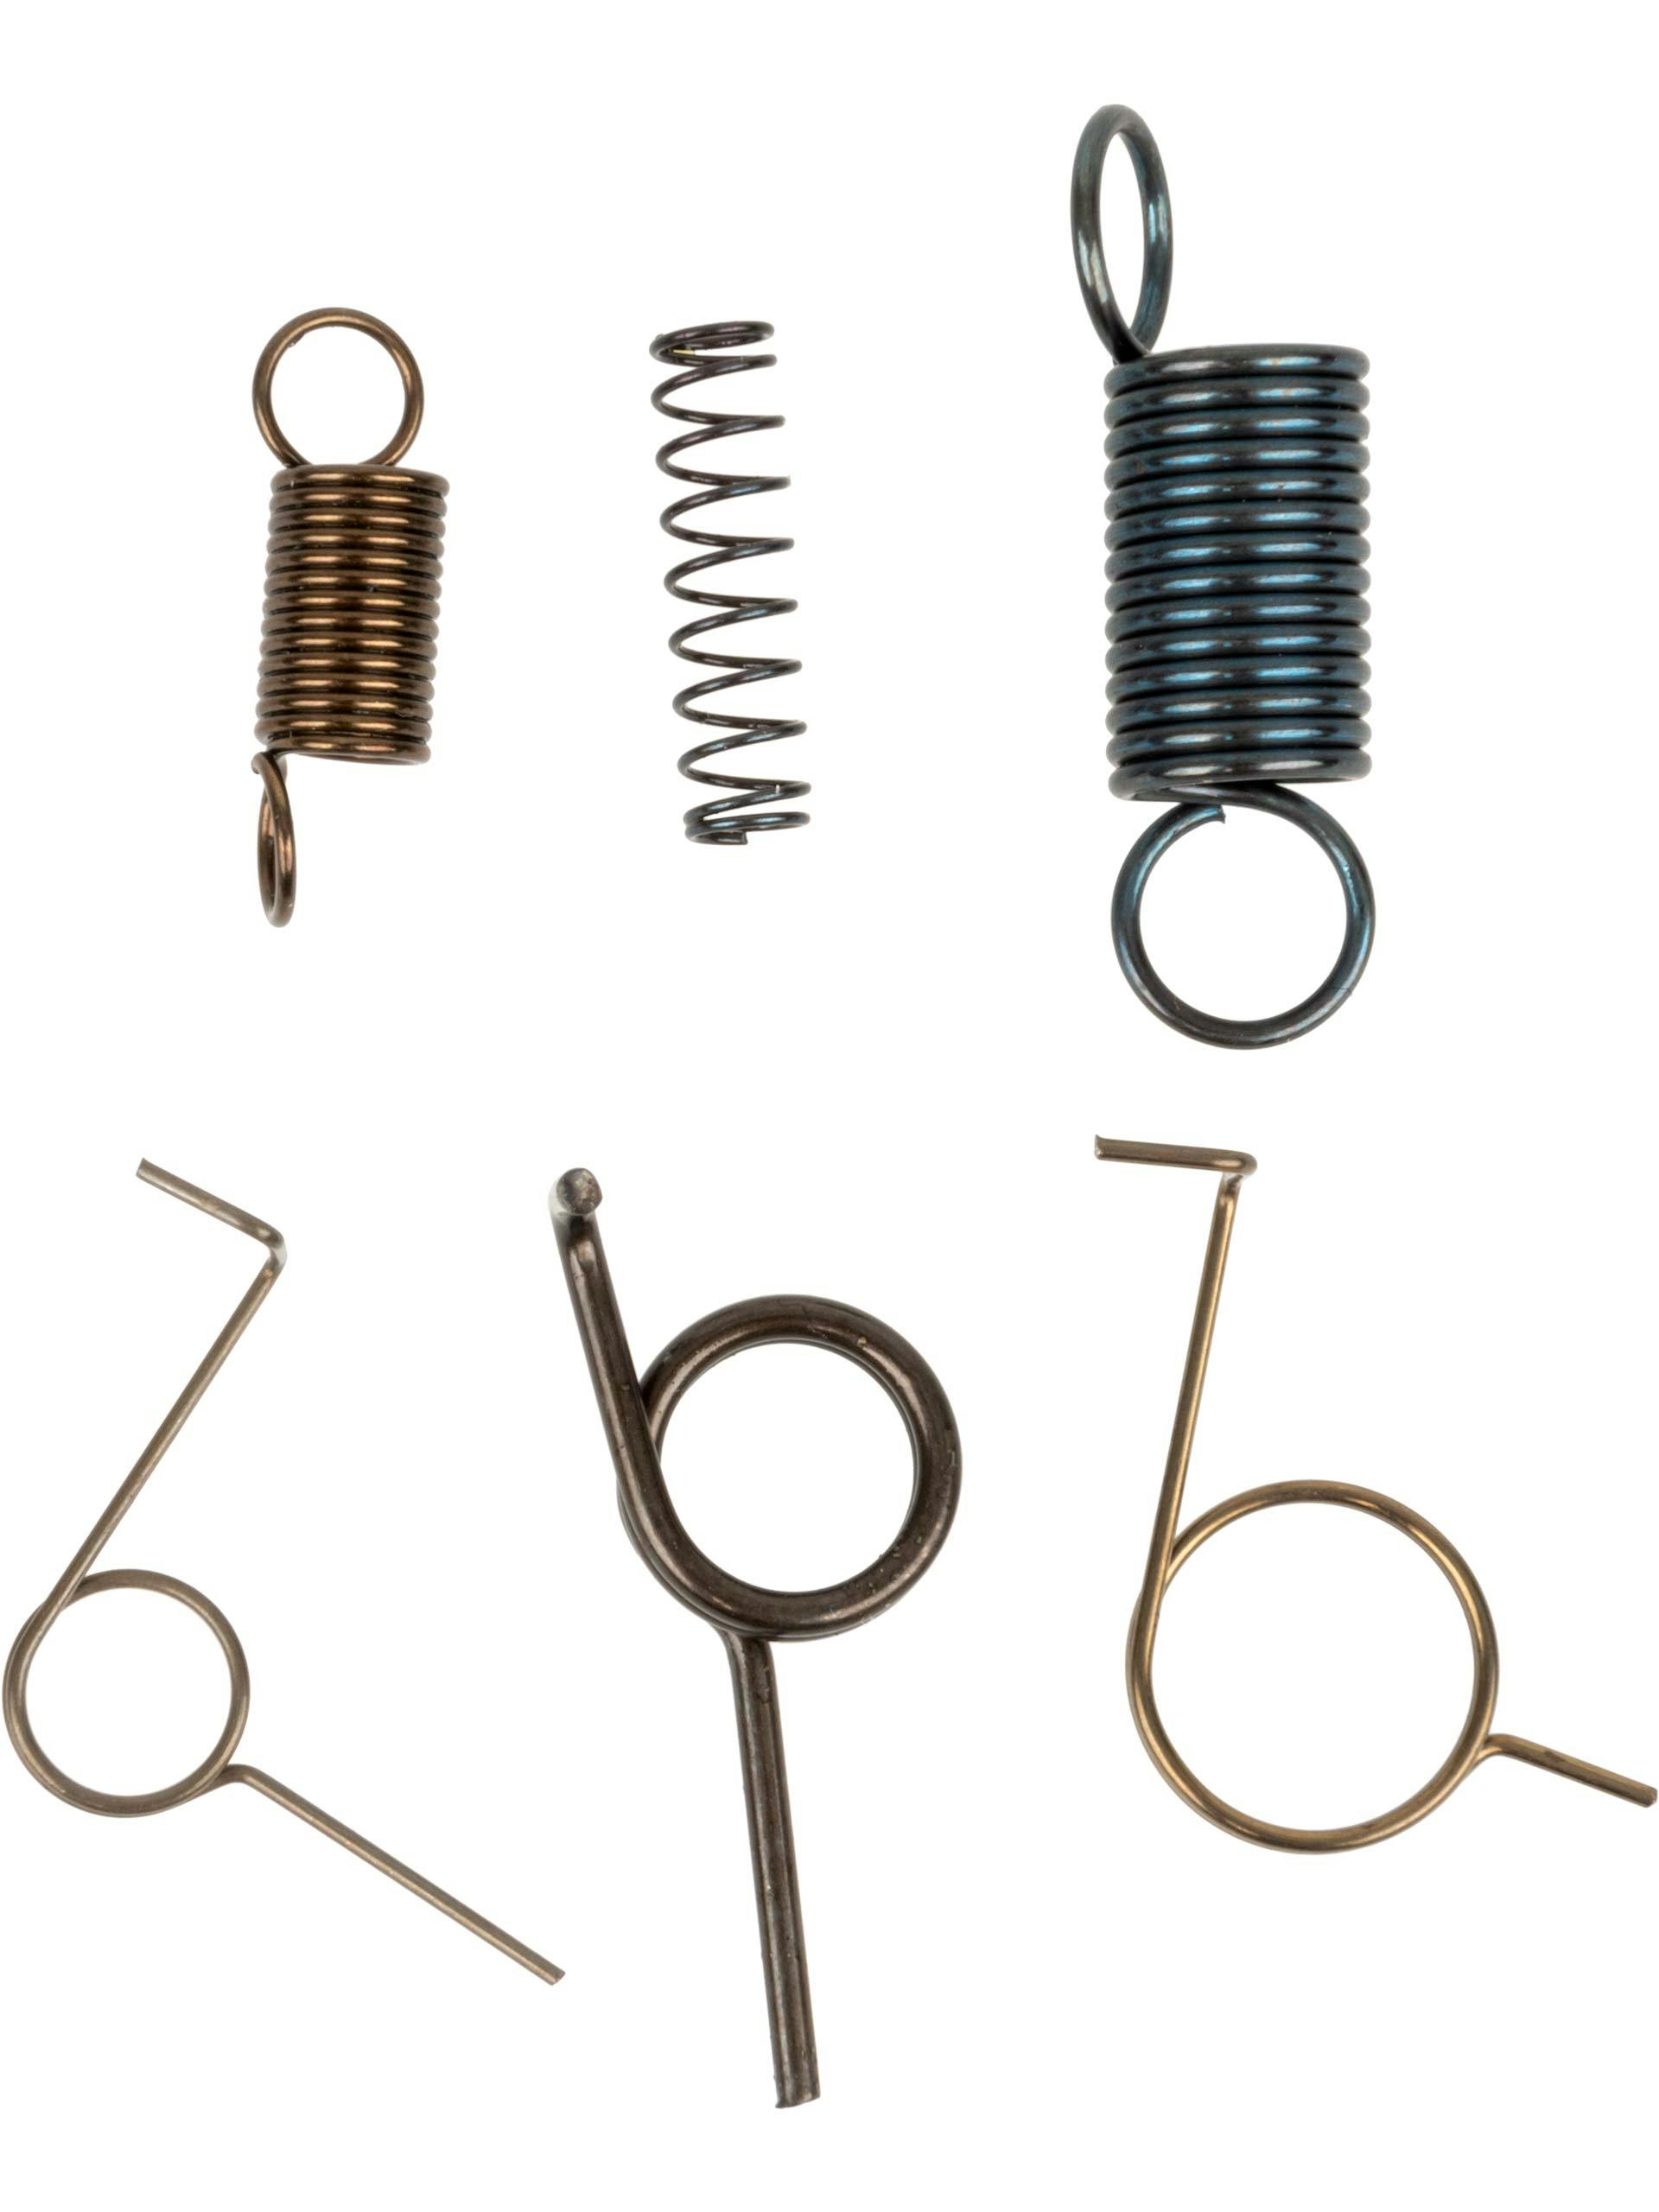 FPS Softair - Reinforced AEG Gearbox Spring Set for Version 2 Gearbox